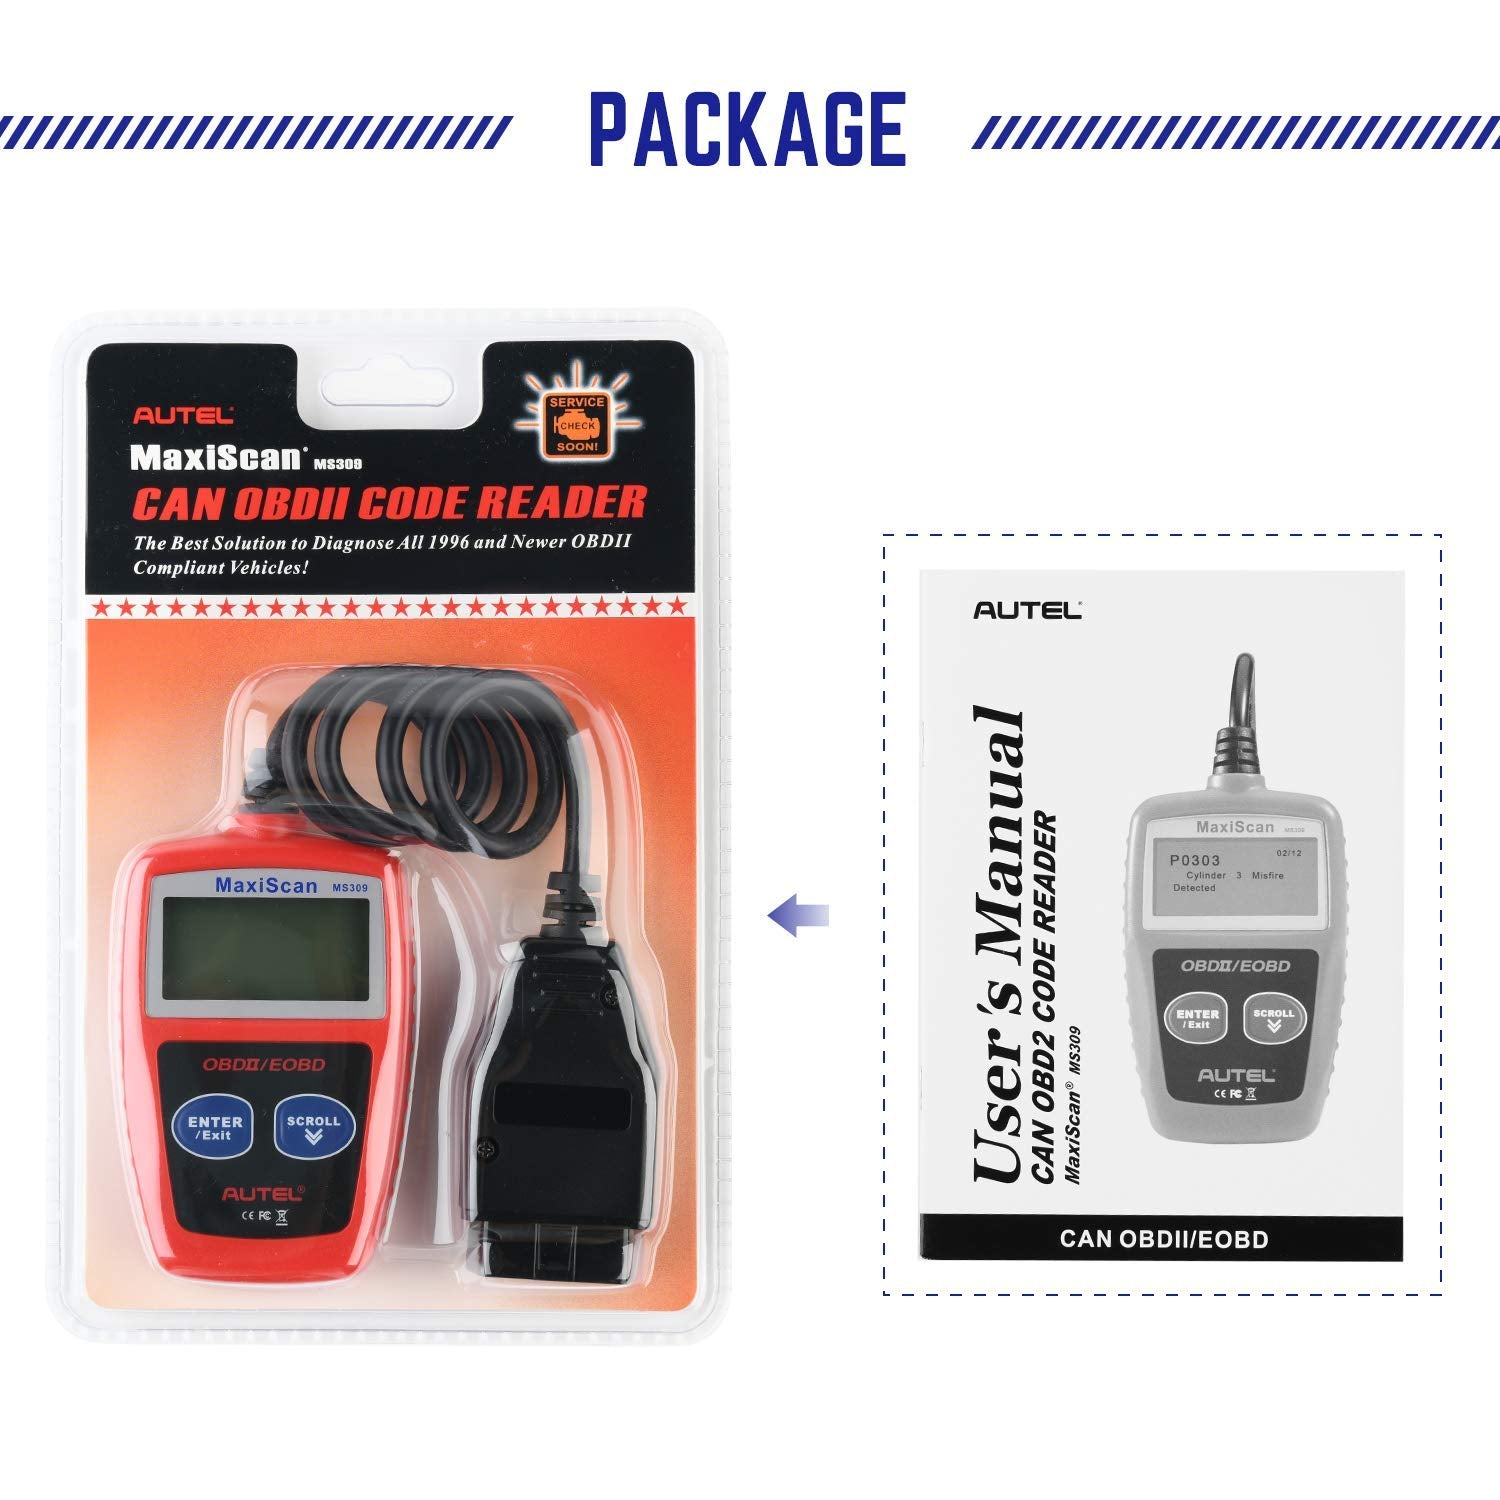 Autel MaxiScan MS309 Car Code Reader Check/ Clear Engine Fault Codes Universal OBD2 Diagnostic Scanner